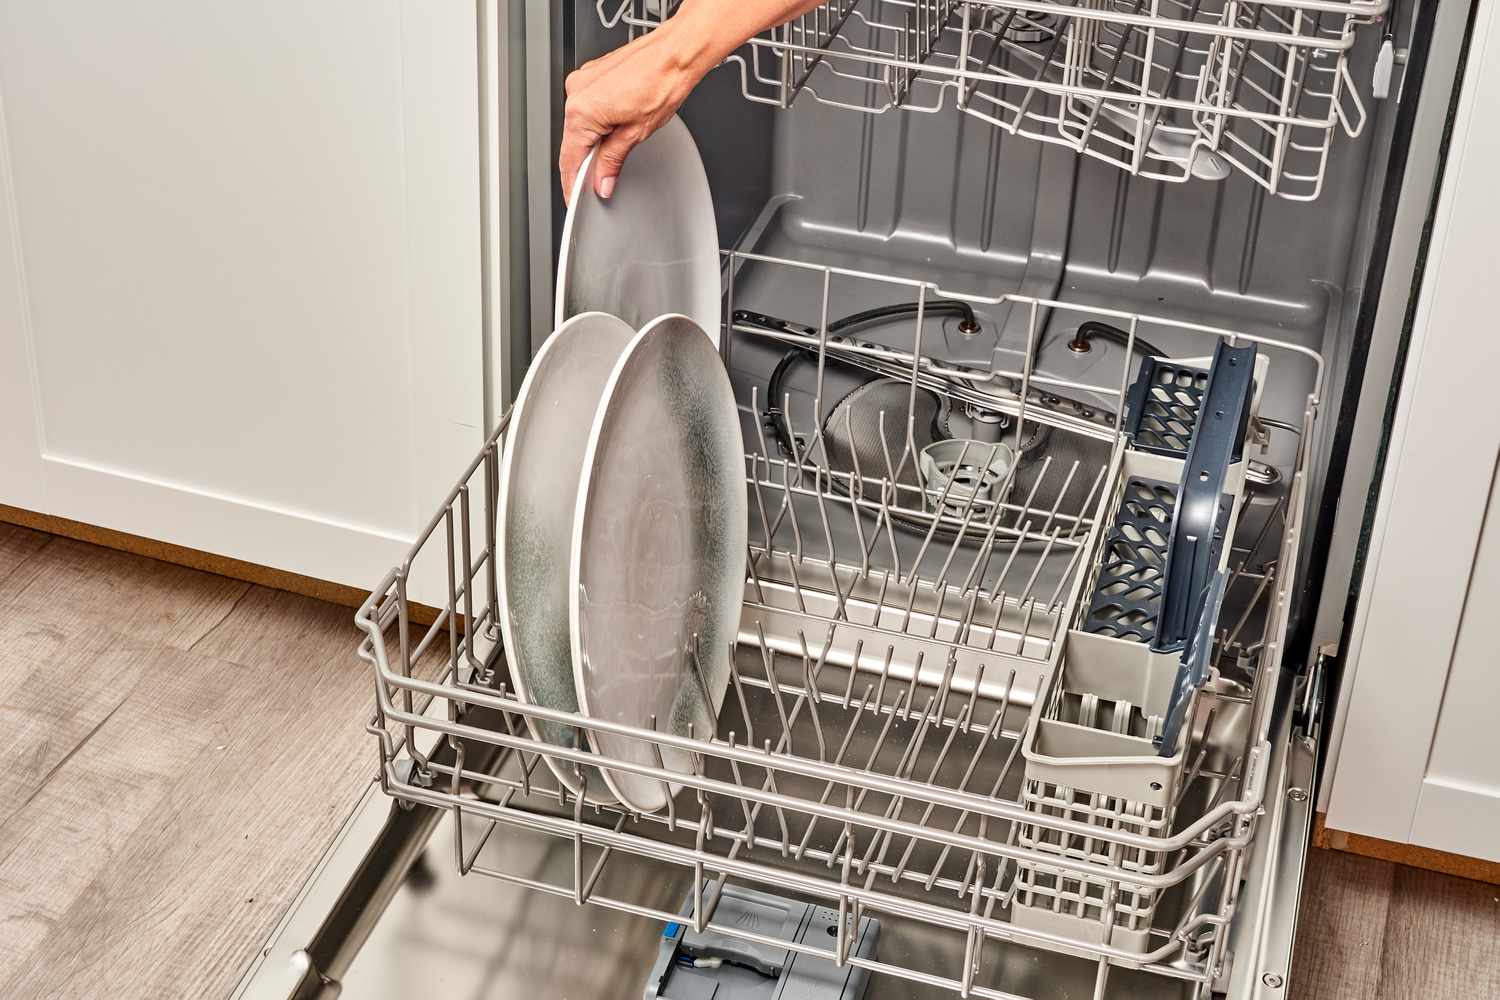 How Much Does Dishwasher Repair Cost